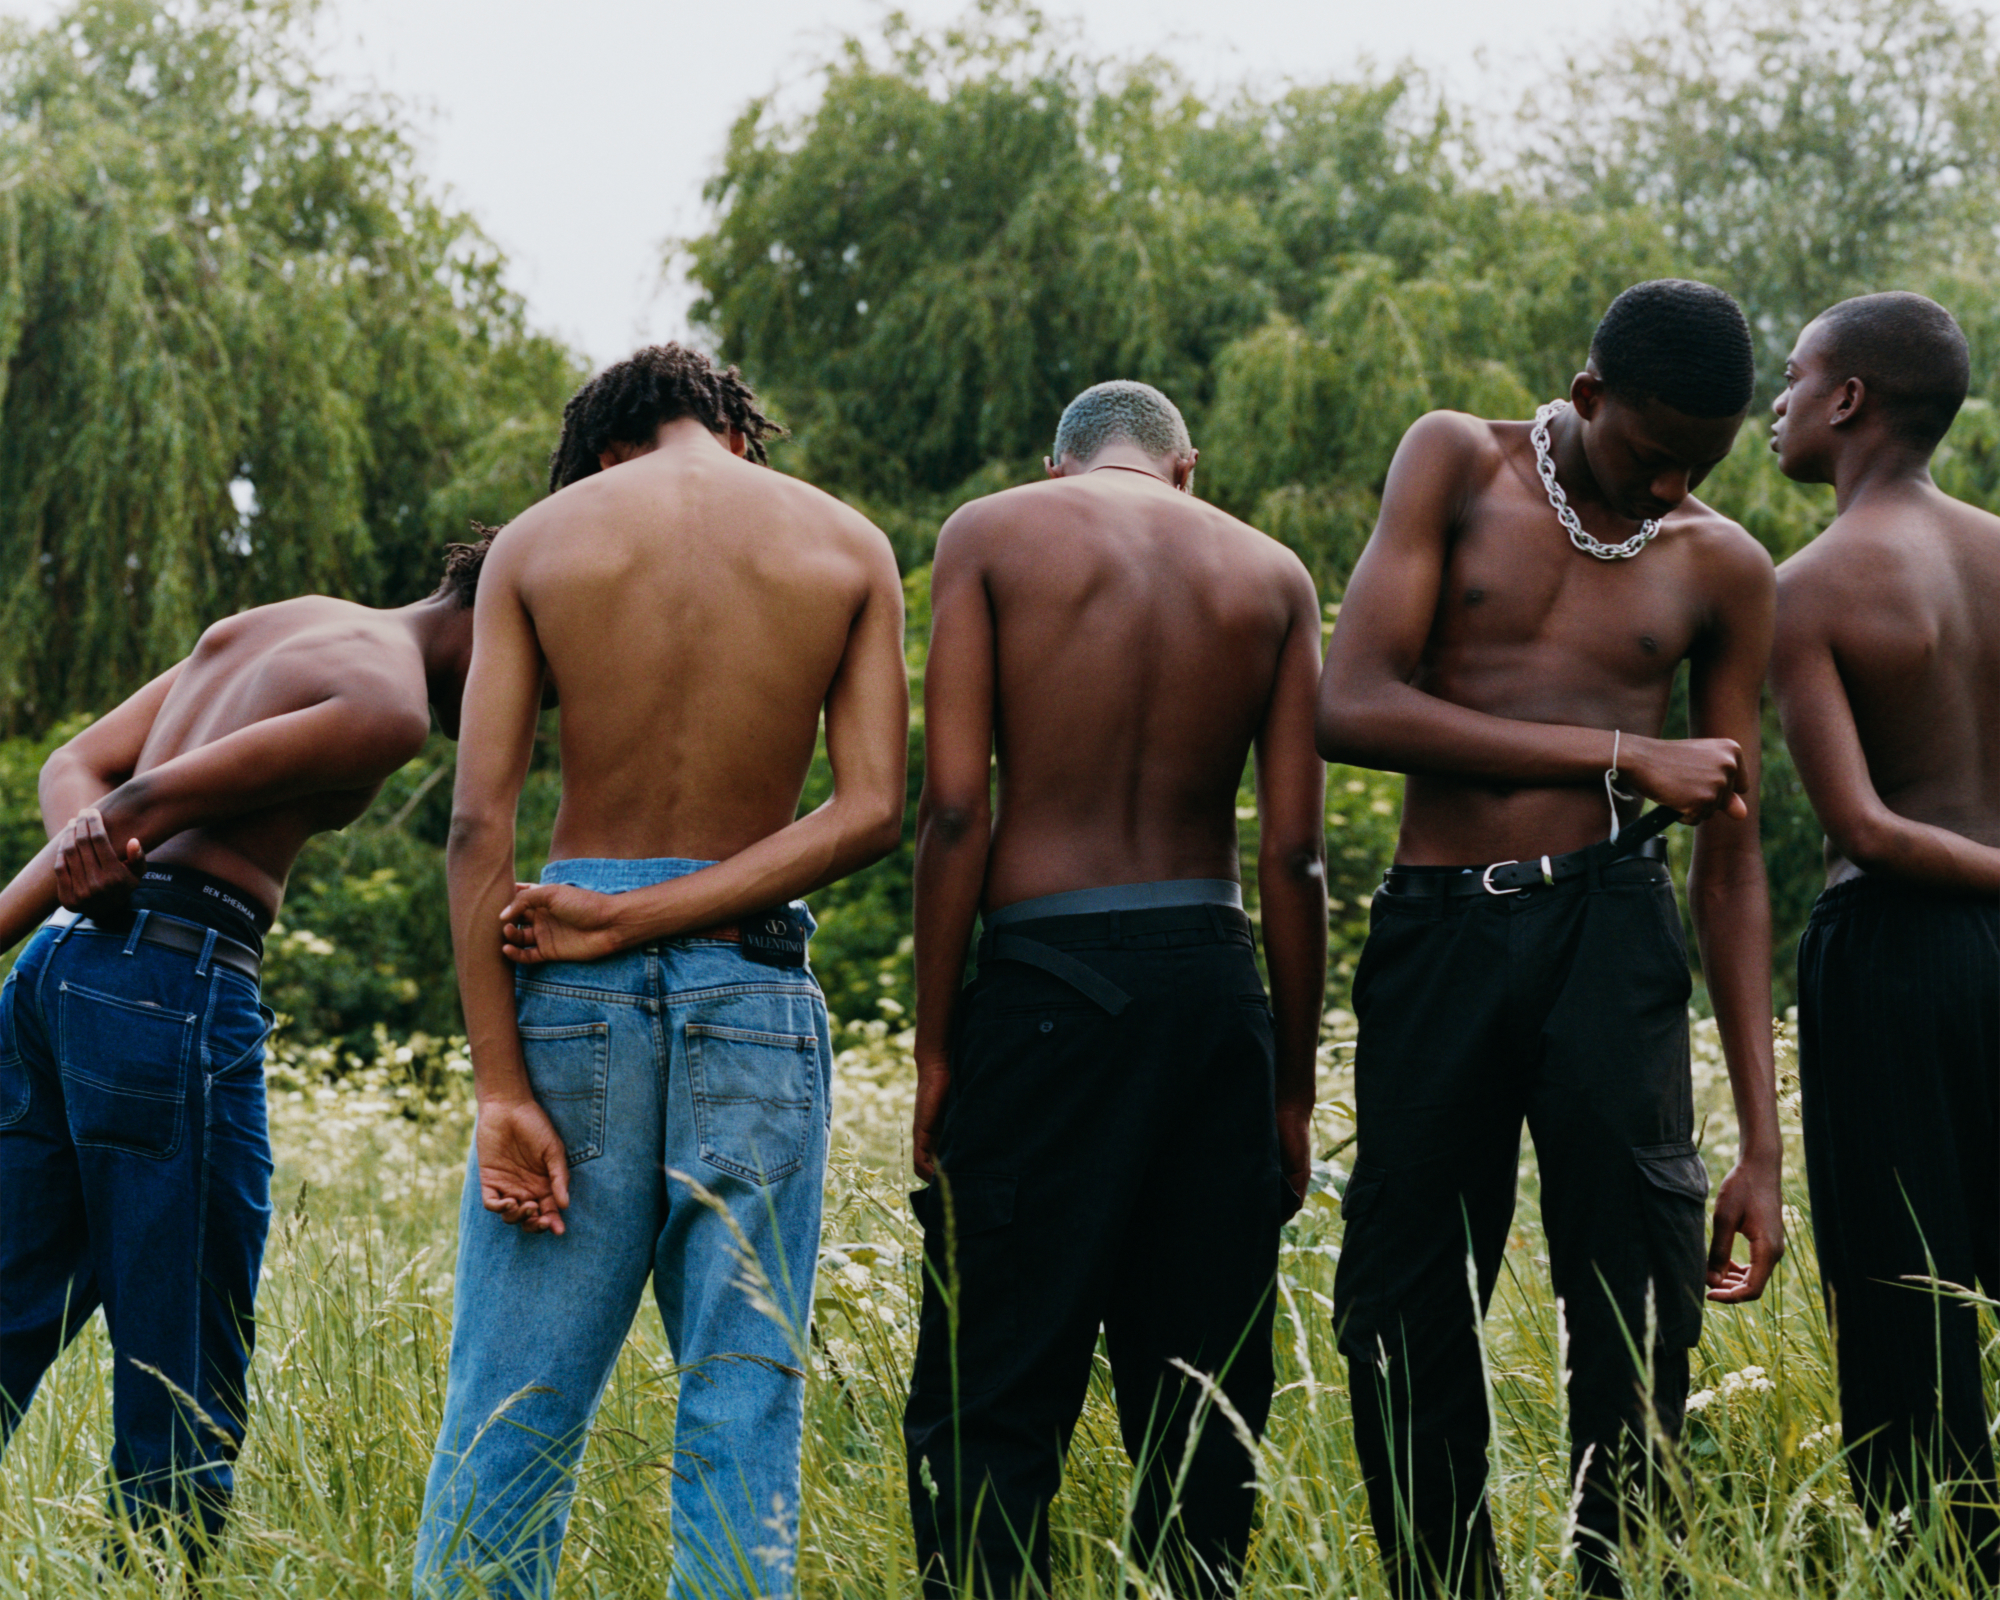 Photograph by Tyler Mitchel of five shirtless men standing in a field with their back towards the camera.